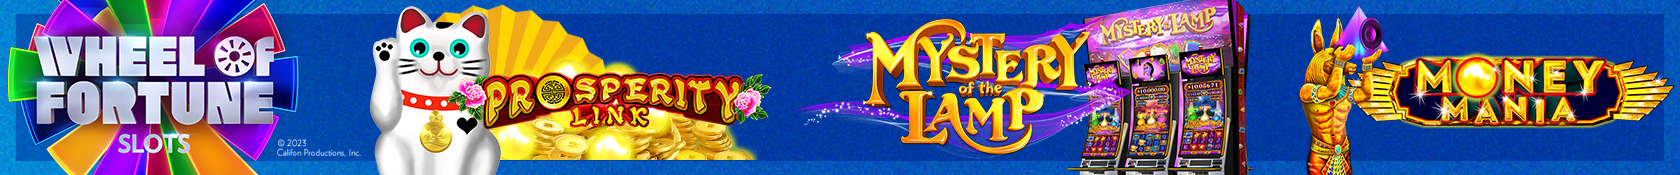 Banner featuring logos for Wheel of Fortune Slots, Prosperity Link, Mystery of the Lamp, and money Mania Premium Slot Machine Games 